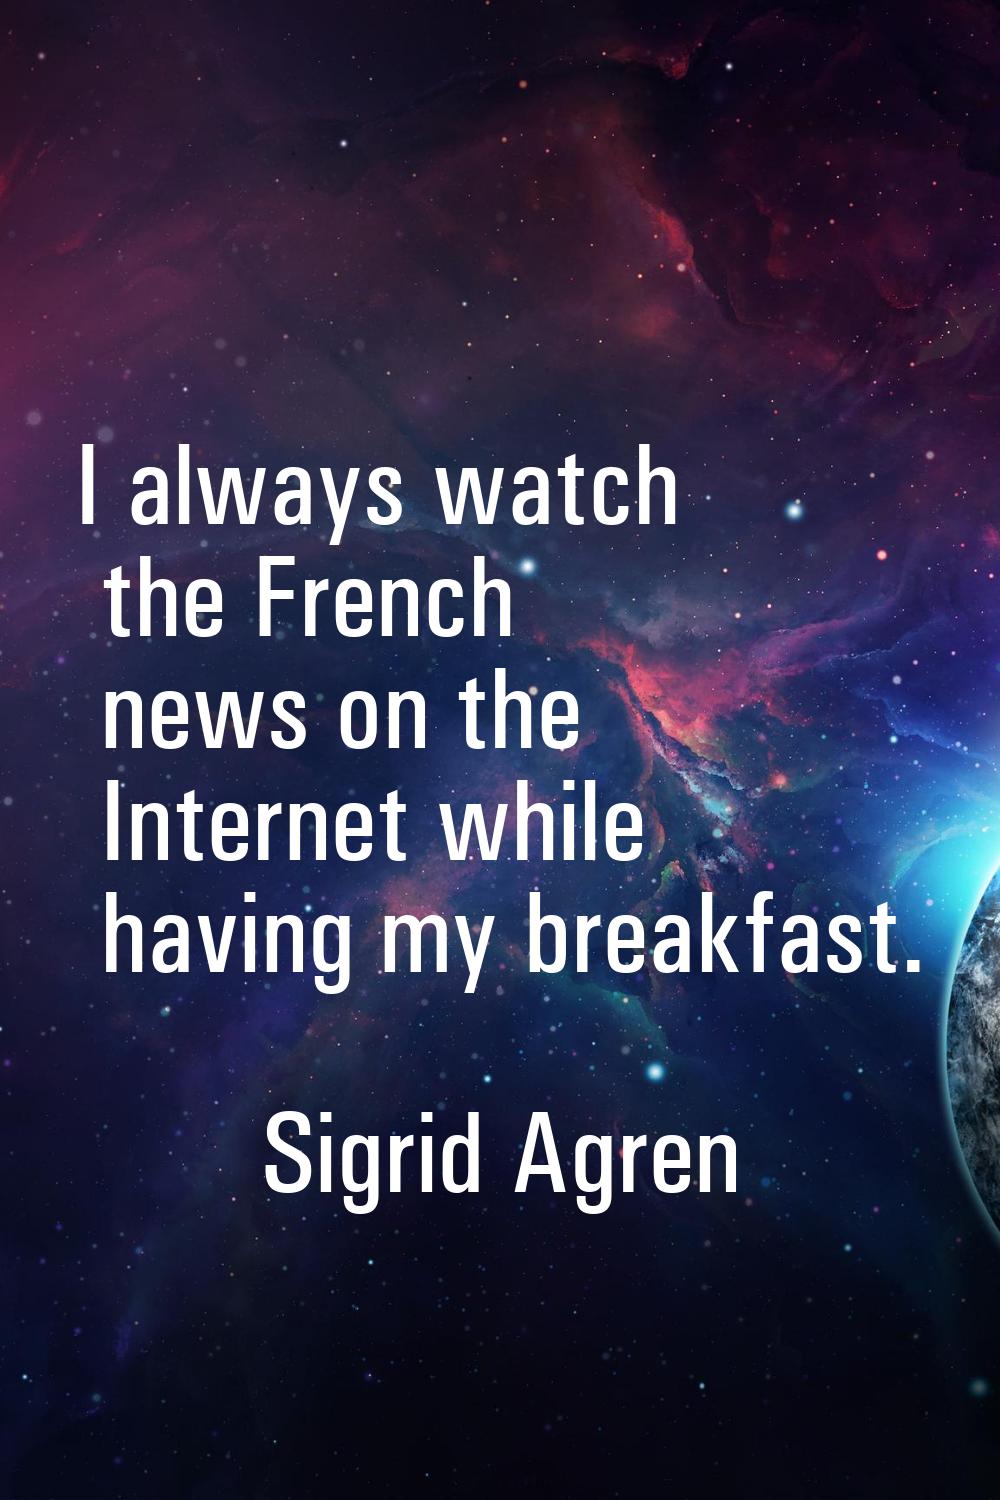 I always watch the French news on the Internet while having my breakfast.